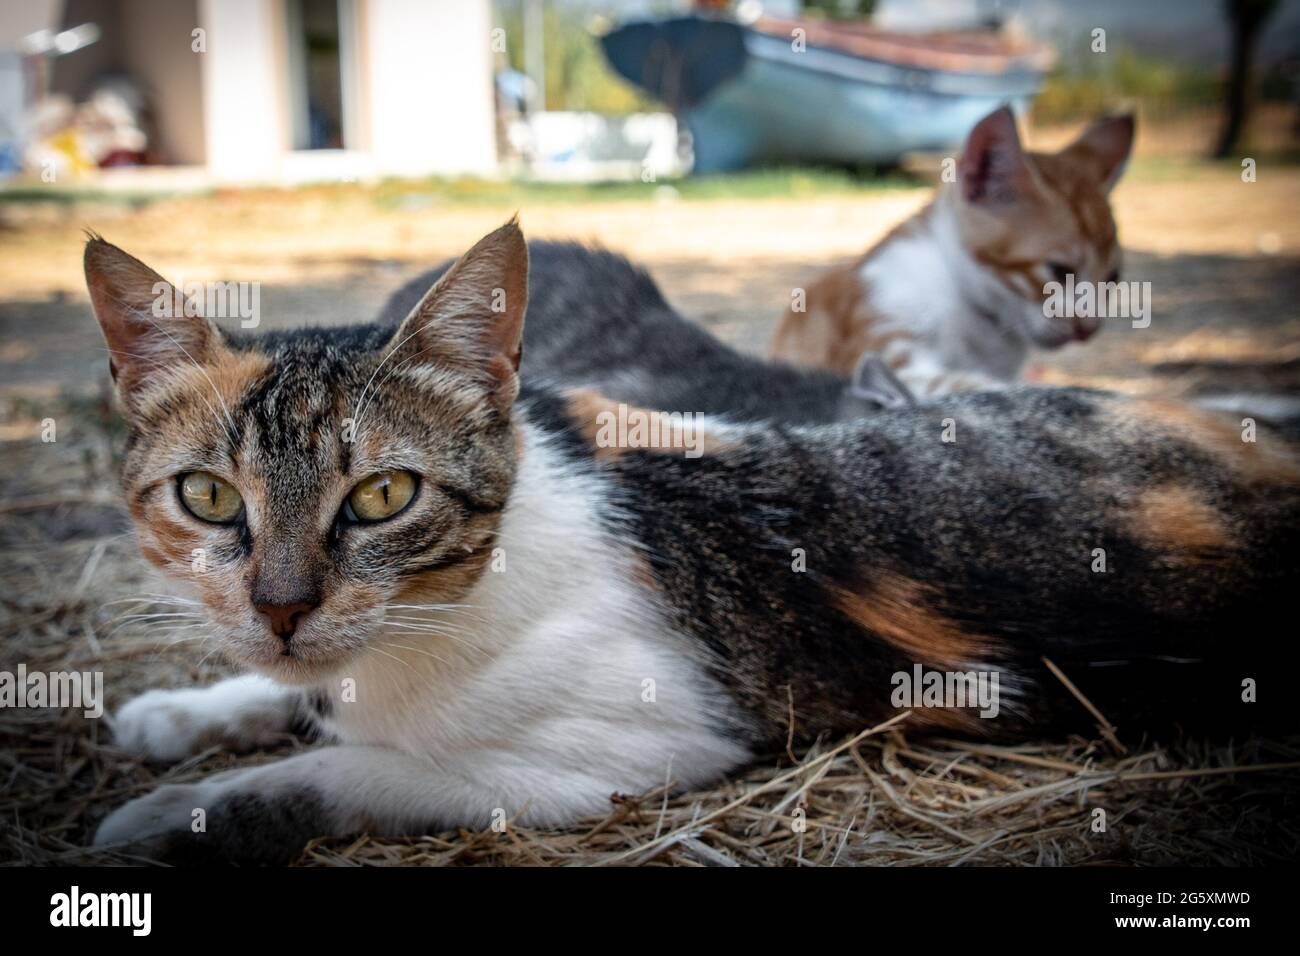 Two Agouti fur colour cats resting in the shadow Stock Photo